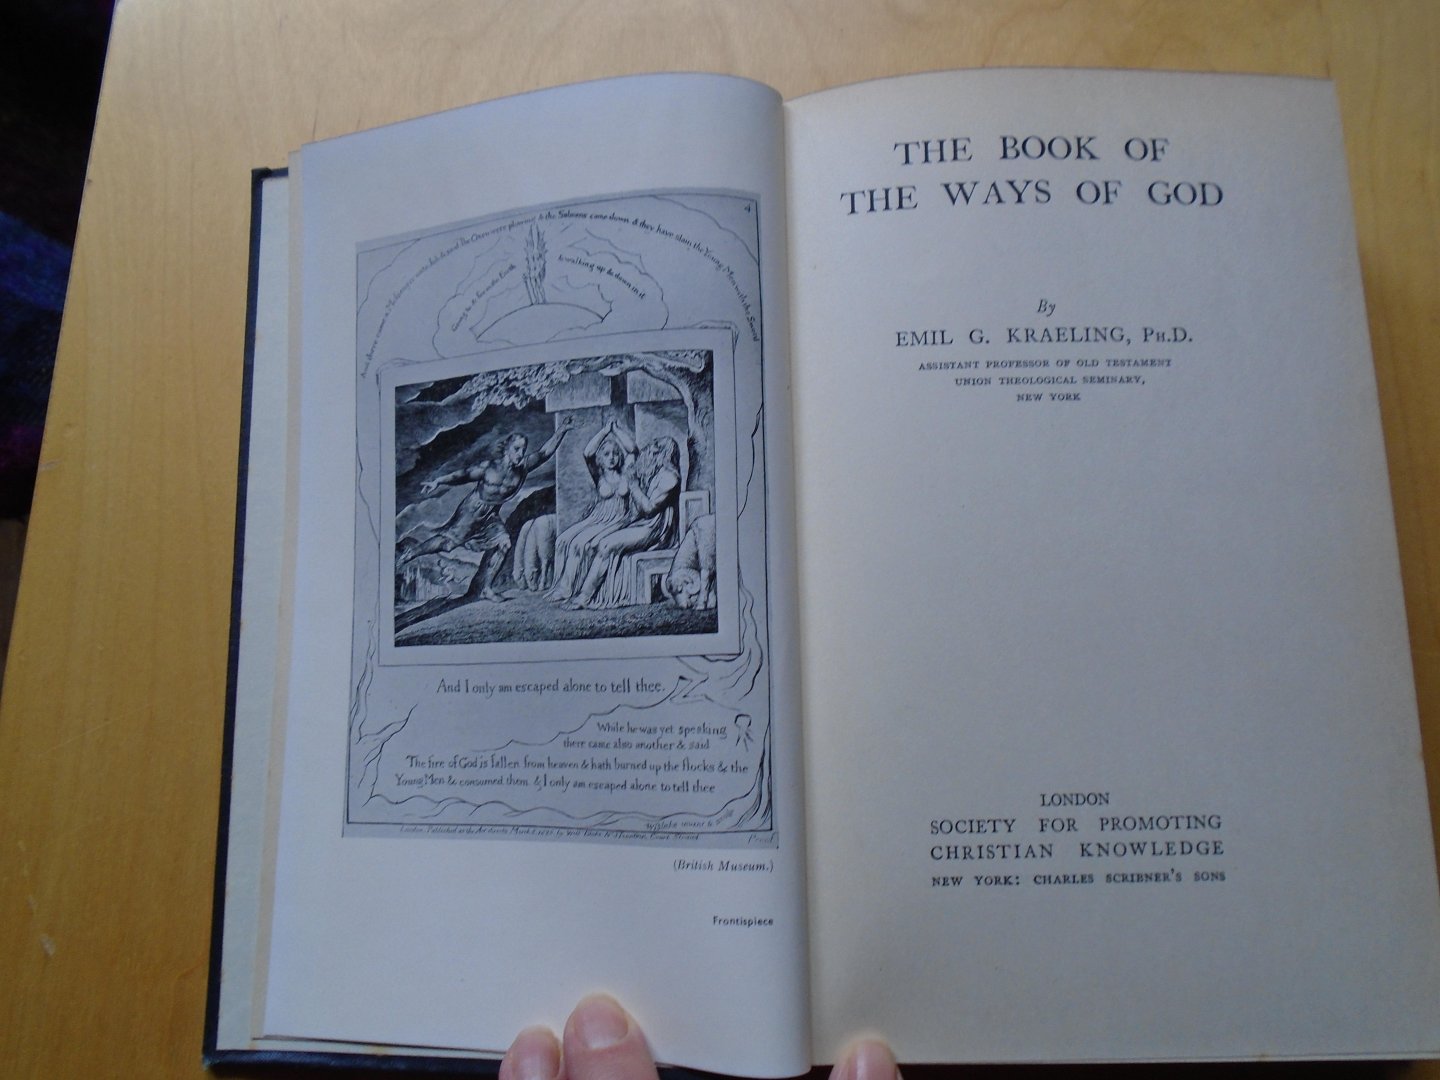 Kraeling, Emil G. - The Book of the Ways of God